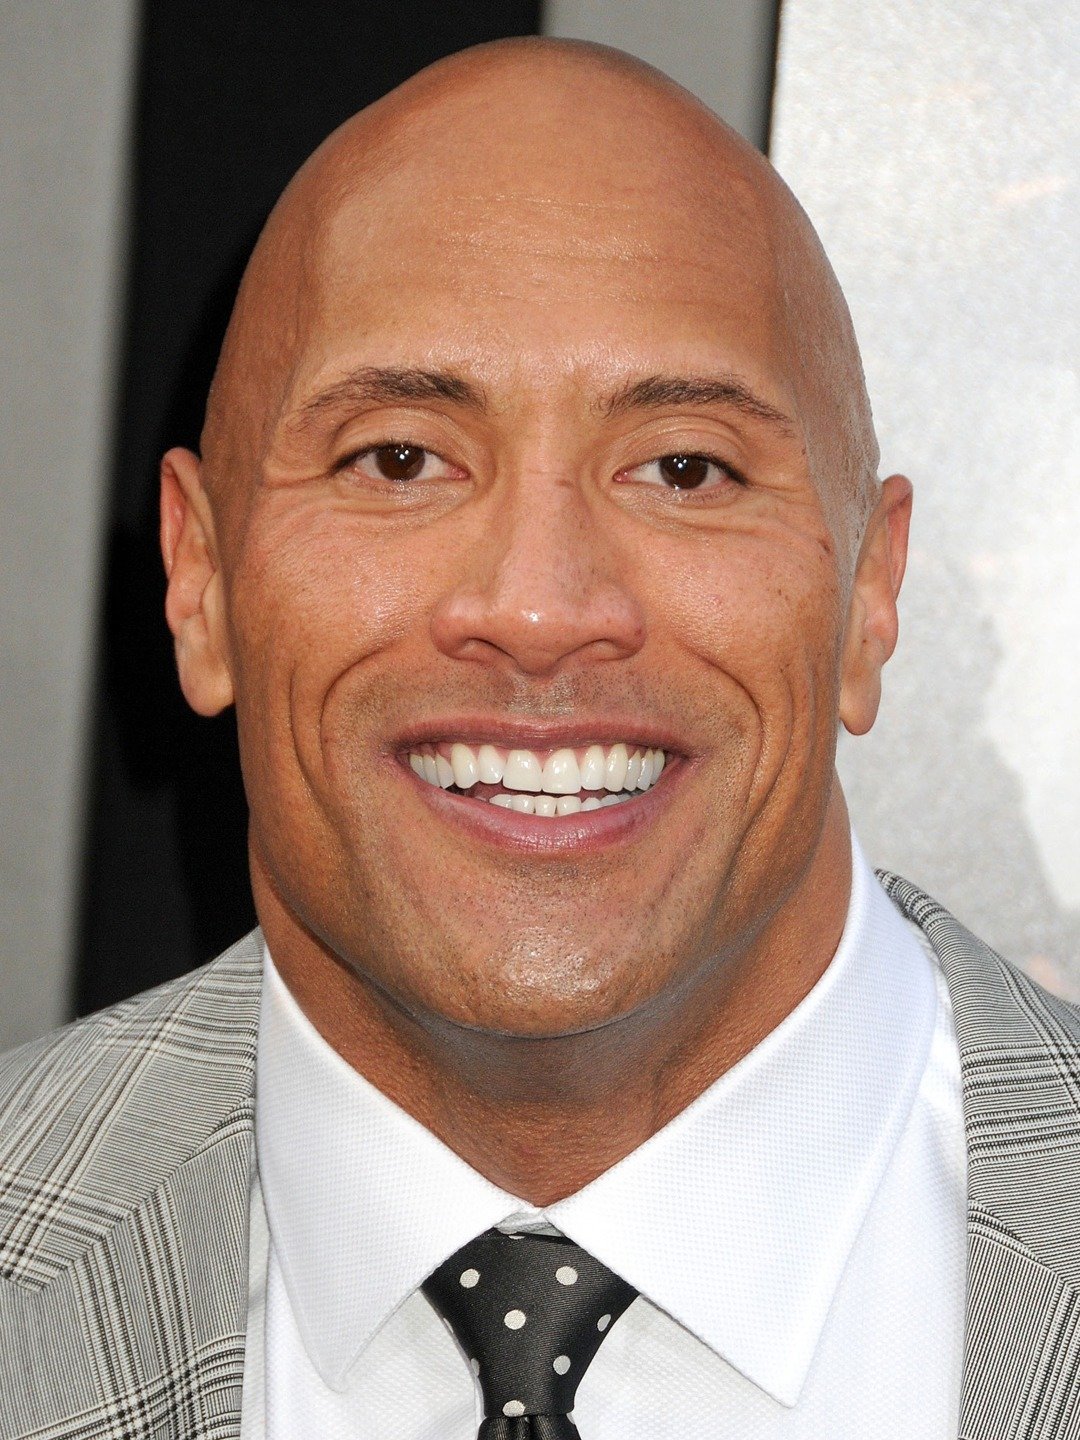 The Rock Meme Face Discover more interesting Actor, American Actor